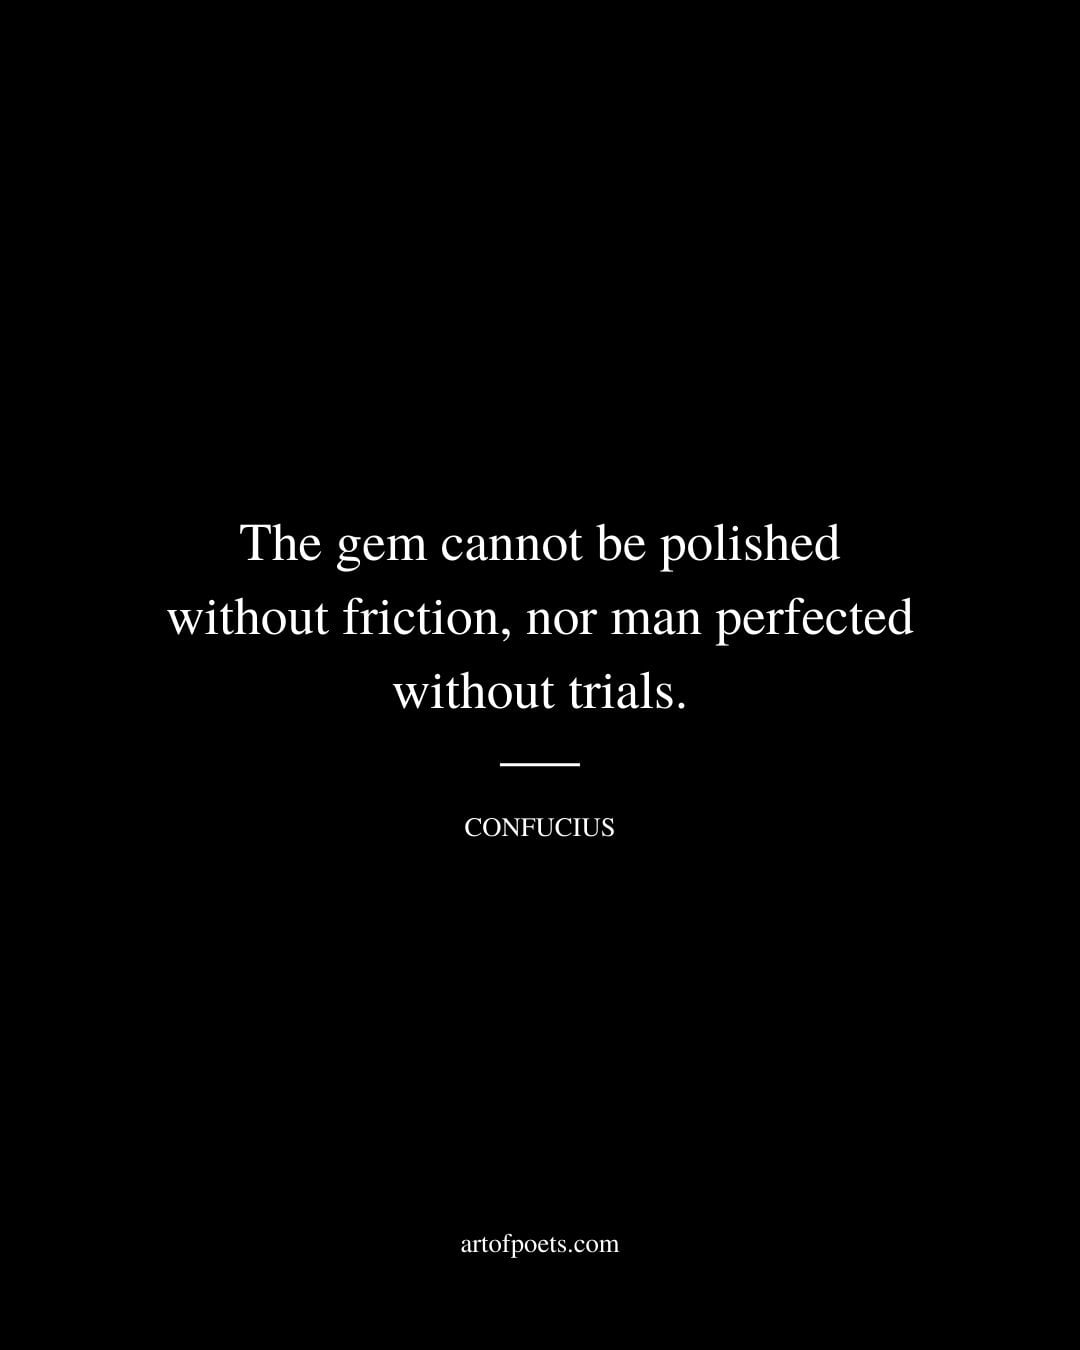 The gem cannot be polished without friction nor man perfected without trials